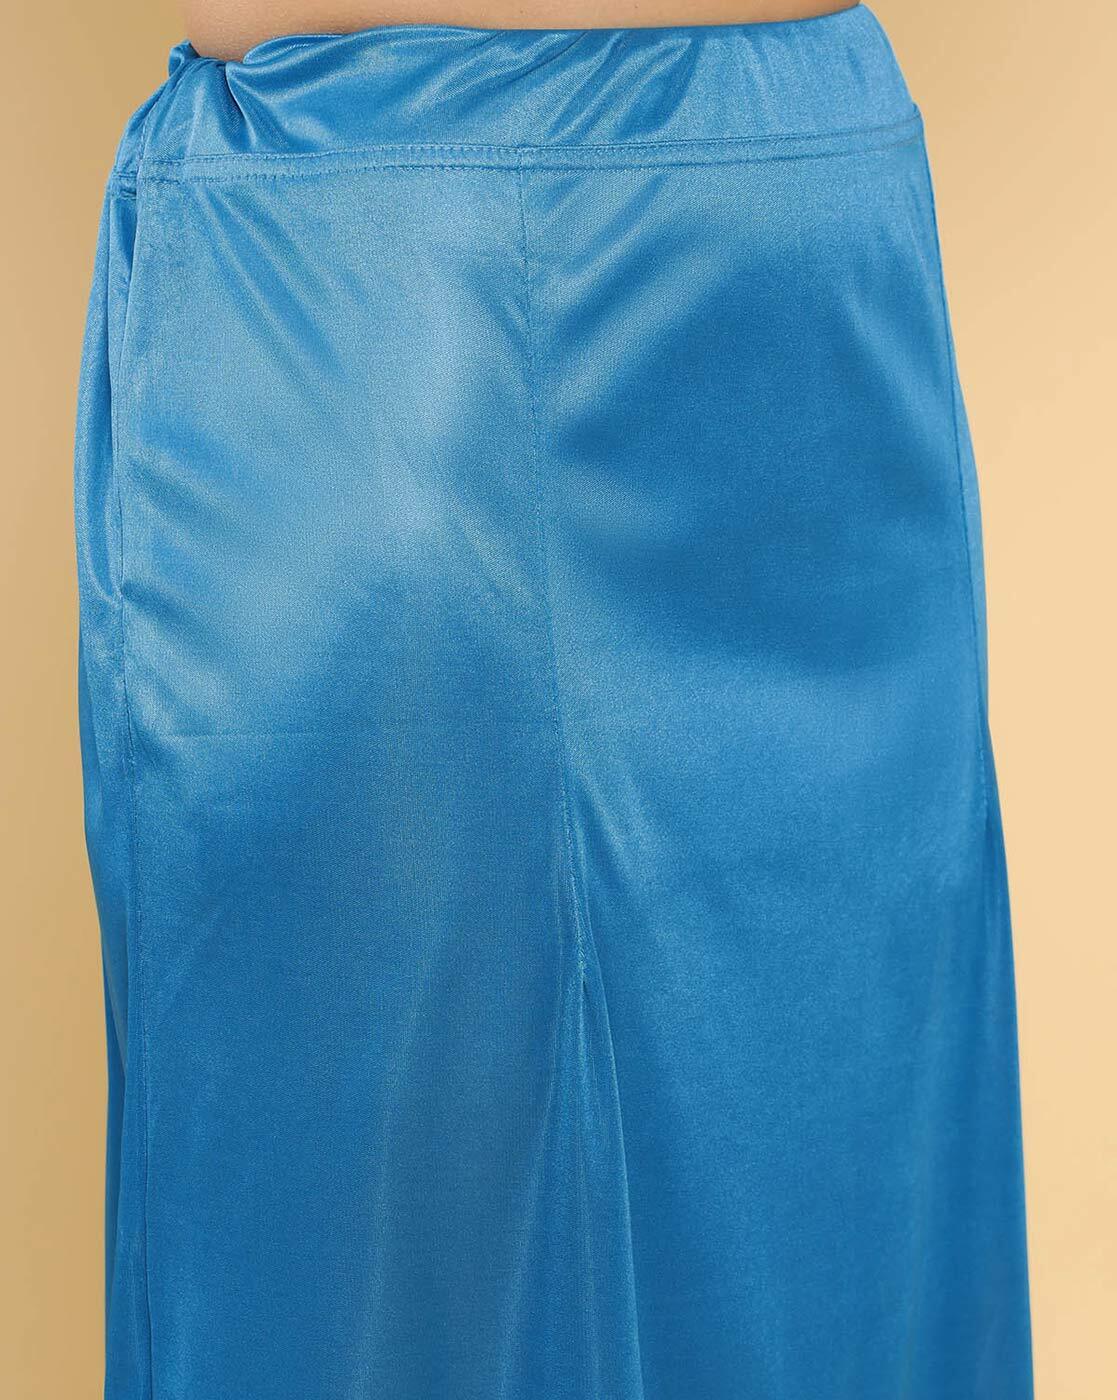 Shop Light Blue Satin Petticoat Collection Online at Soch USA